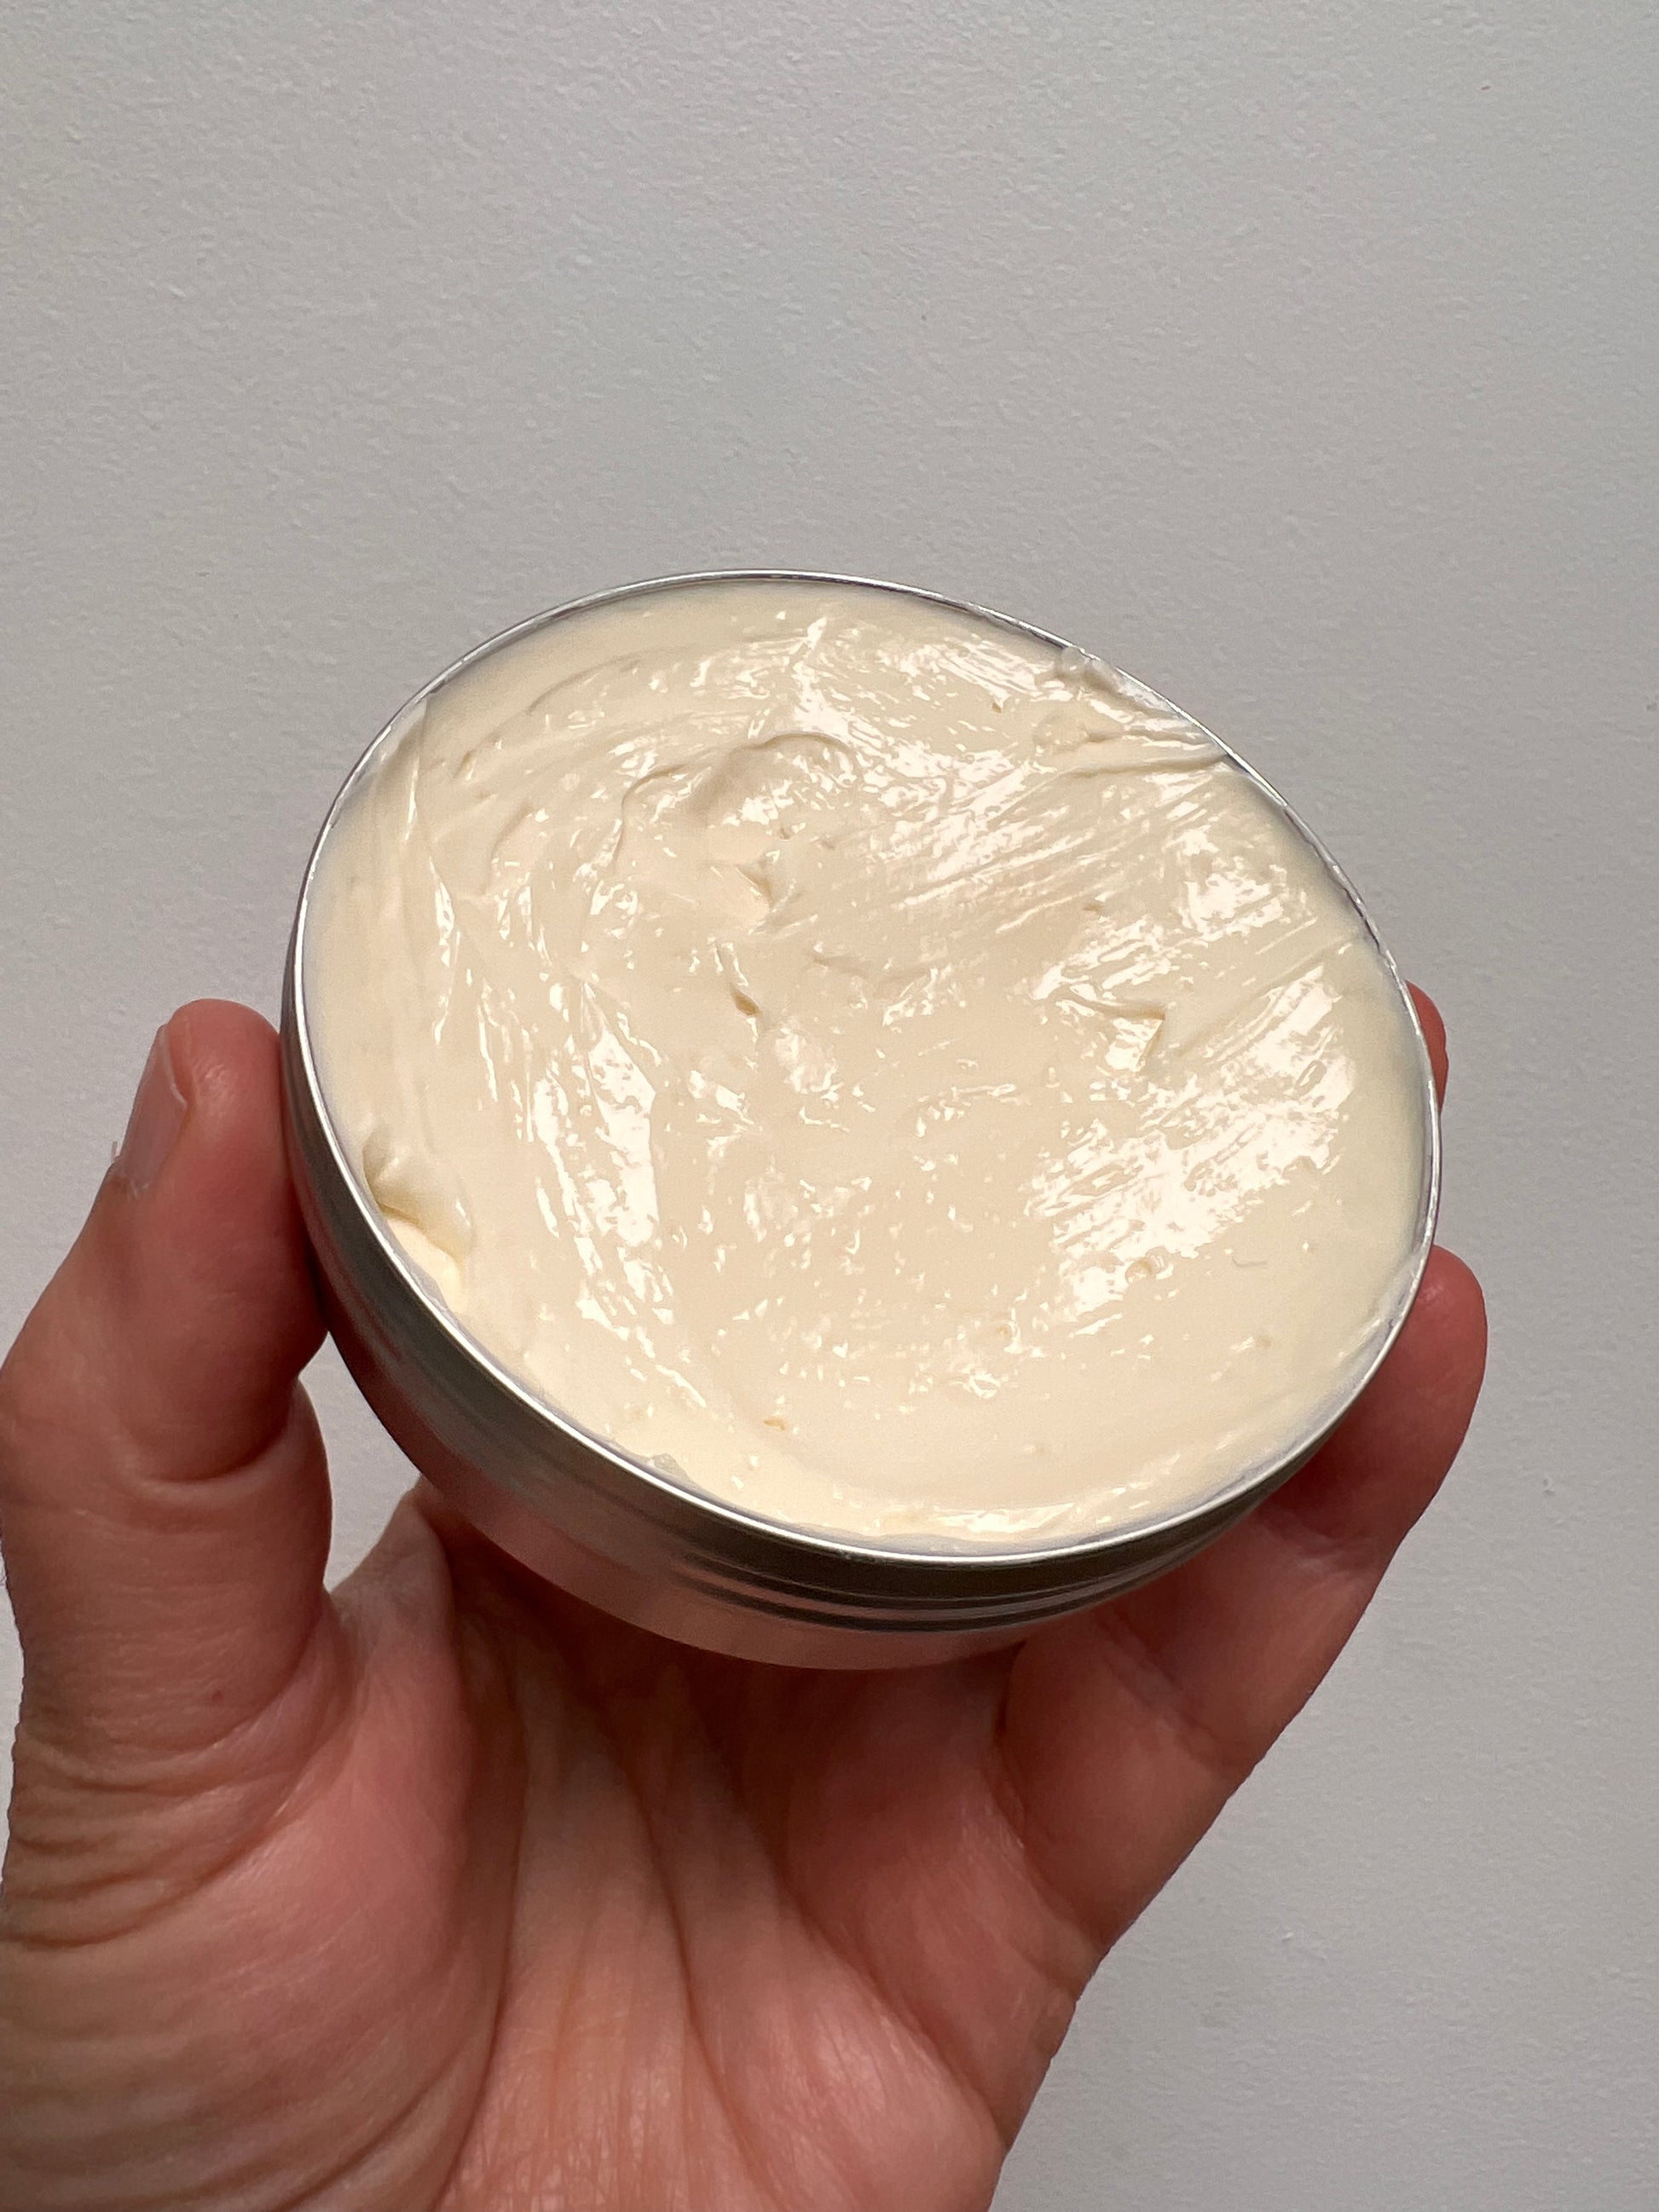 Lid off showing the facial cream which is white and thick